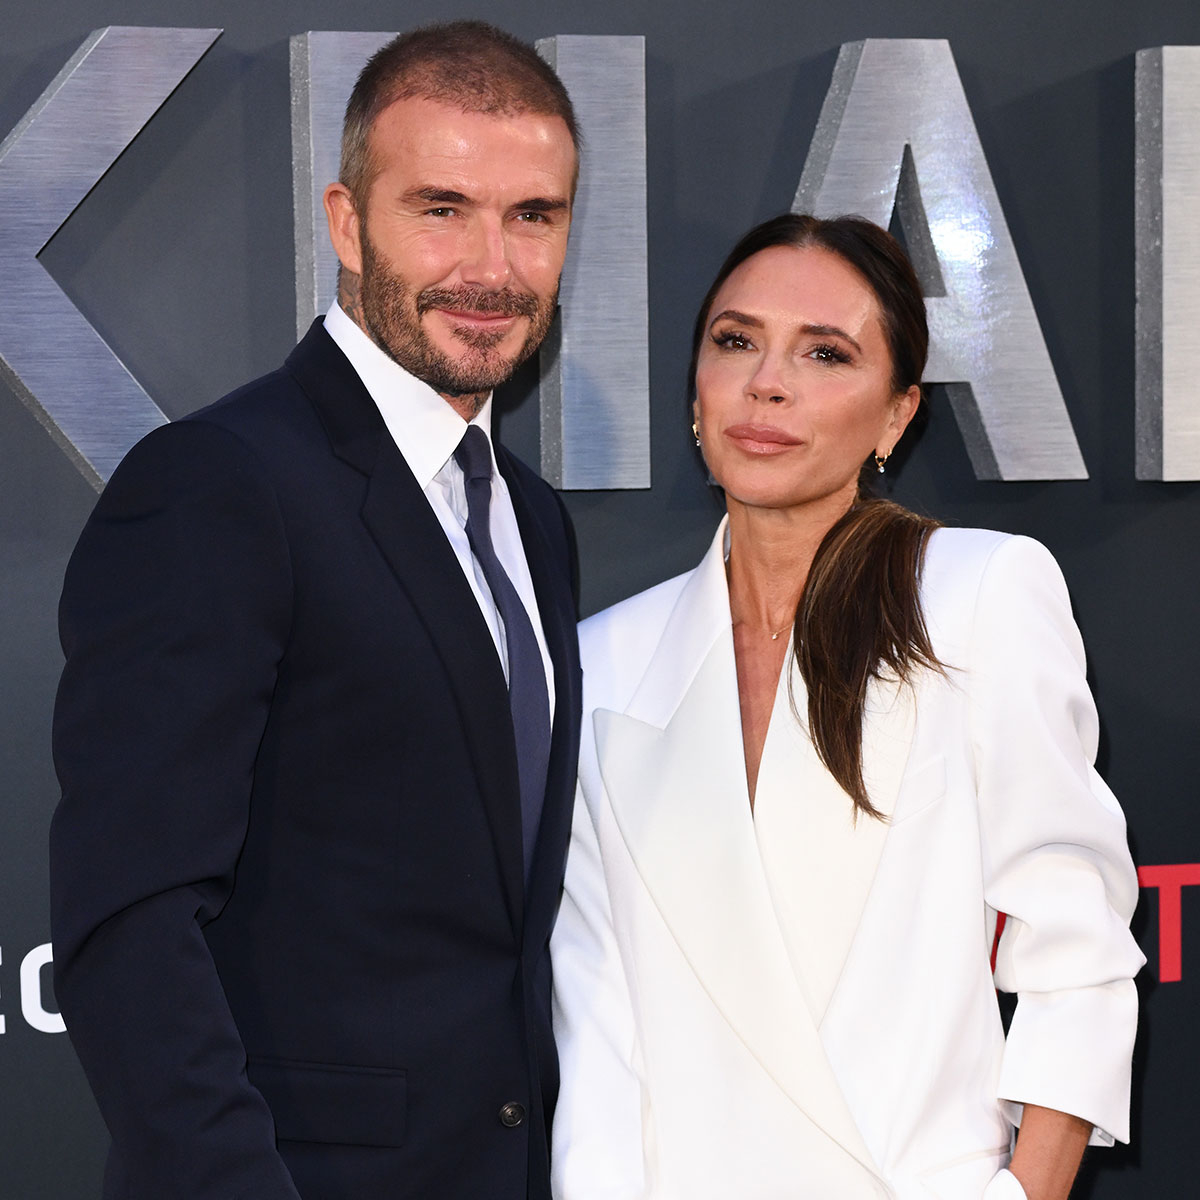 Victoria Beckham Speaks Out on Those Divorce Rumors, & Discusses